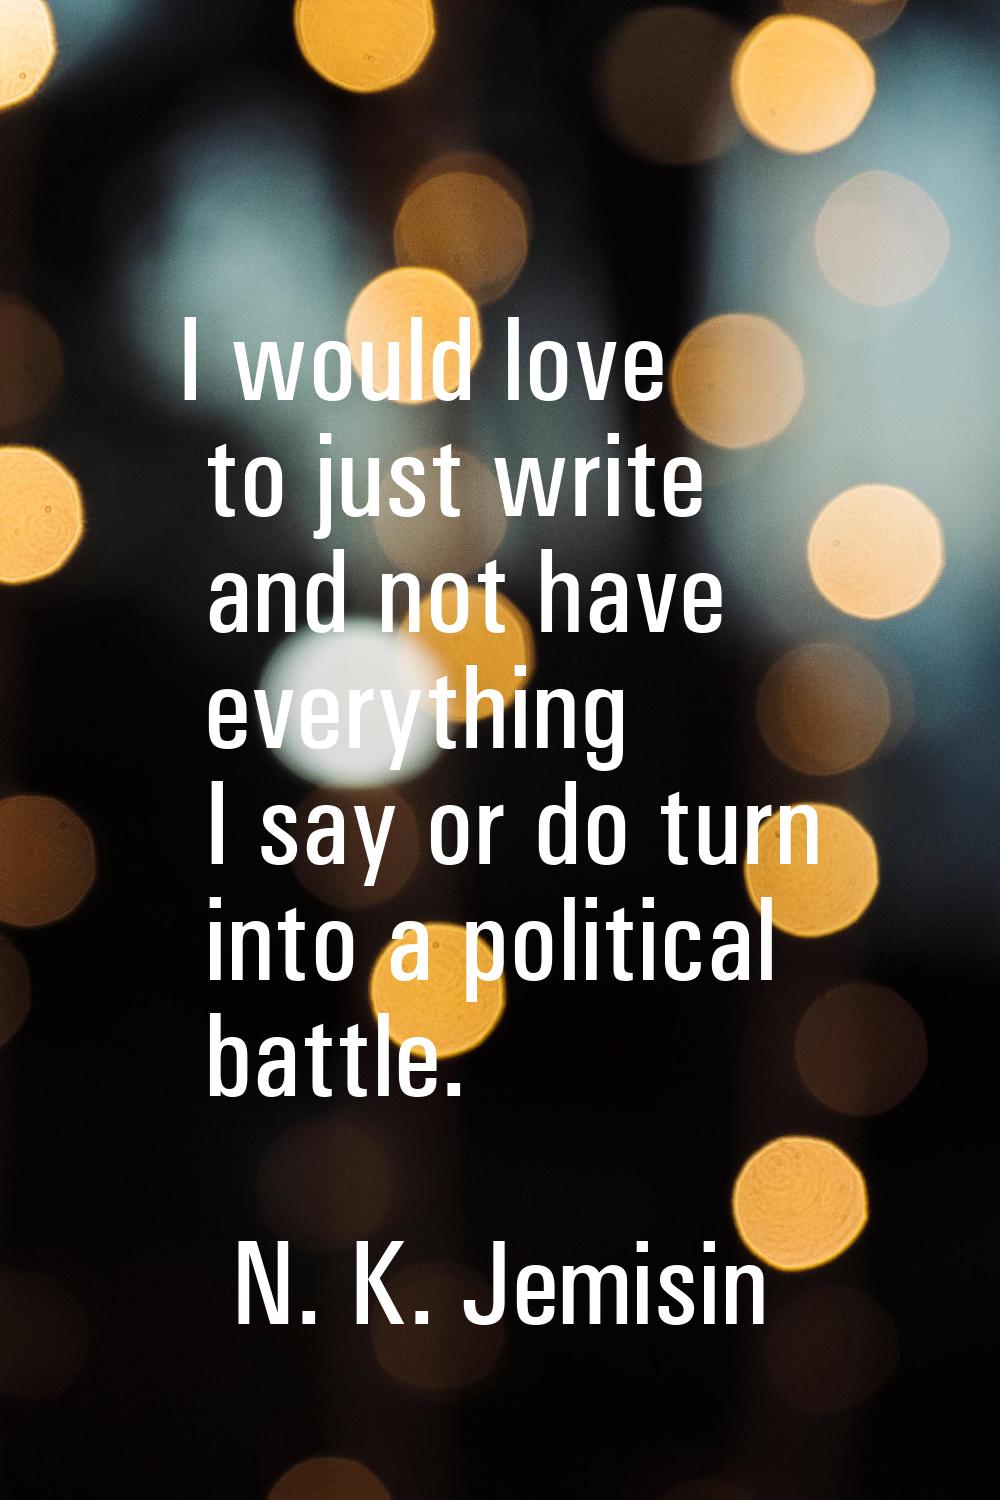 I would love to just write and not have everything I say or do turn into a political battle.